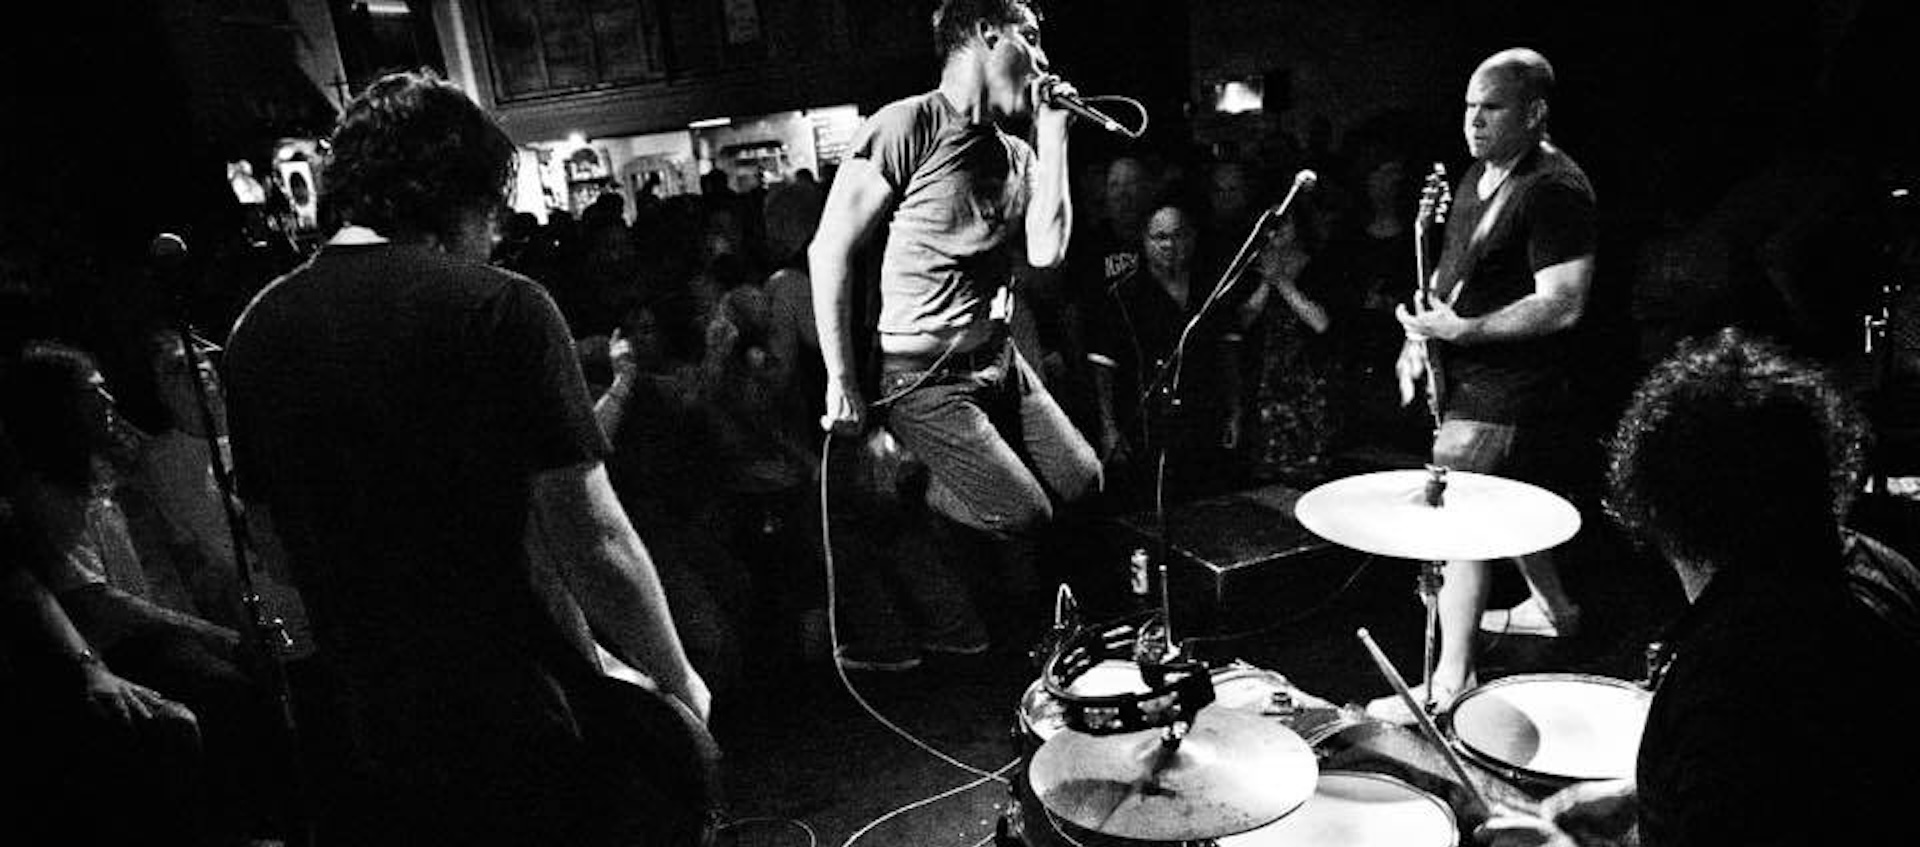 Black and white image of a rock band seen from behind in a packed crowd.